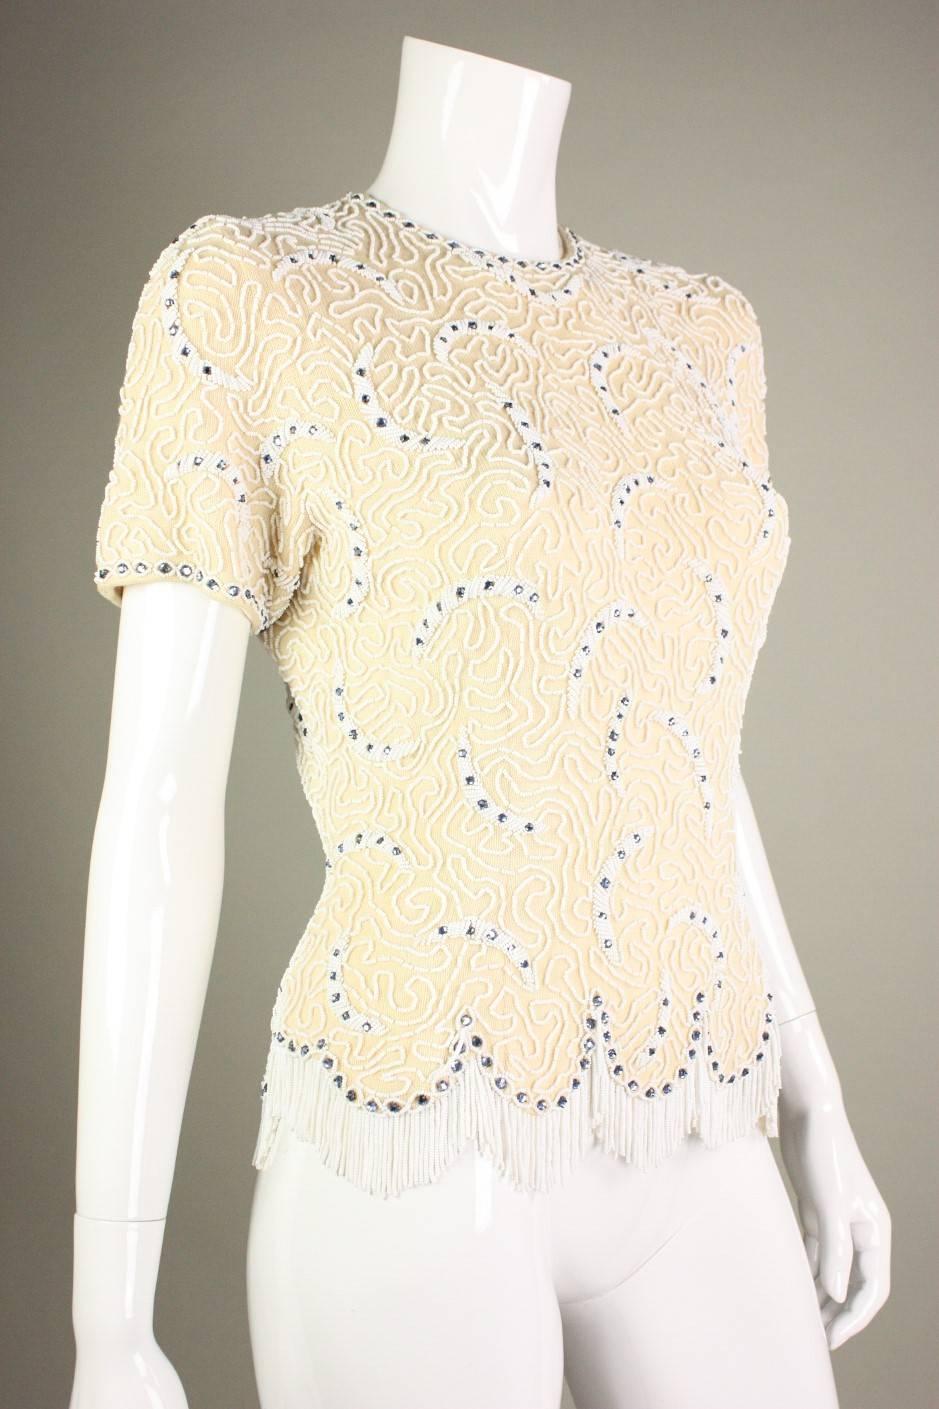 Vintage sweater from Elsie Tu dates to the 1950's through early 1960's and is made of cream-colored wool.  It is decorated with white seed beads in a squiggle pattern and highlighted with sapphire blue, prong-set rhinestones.  Scalloped hem has